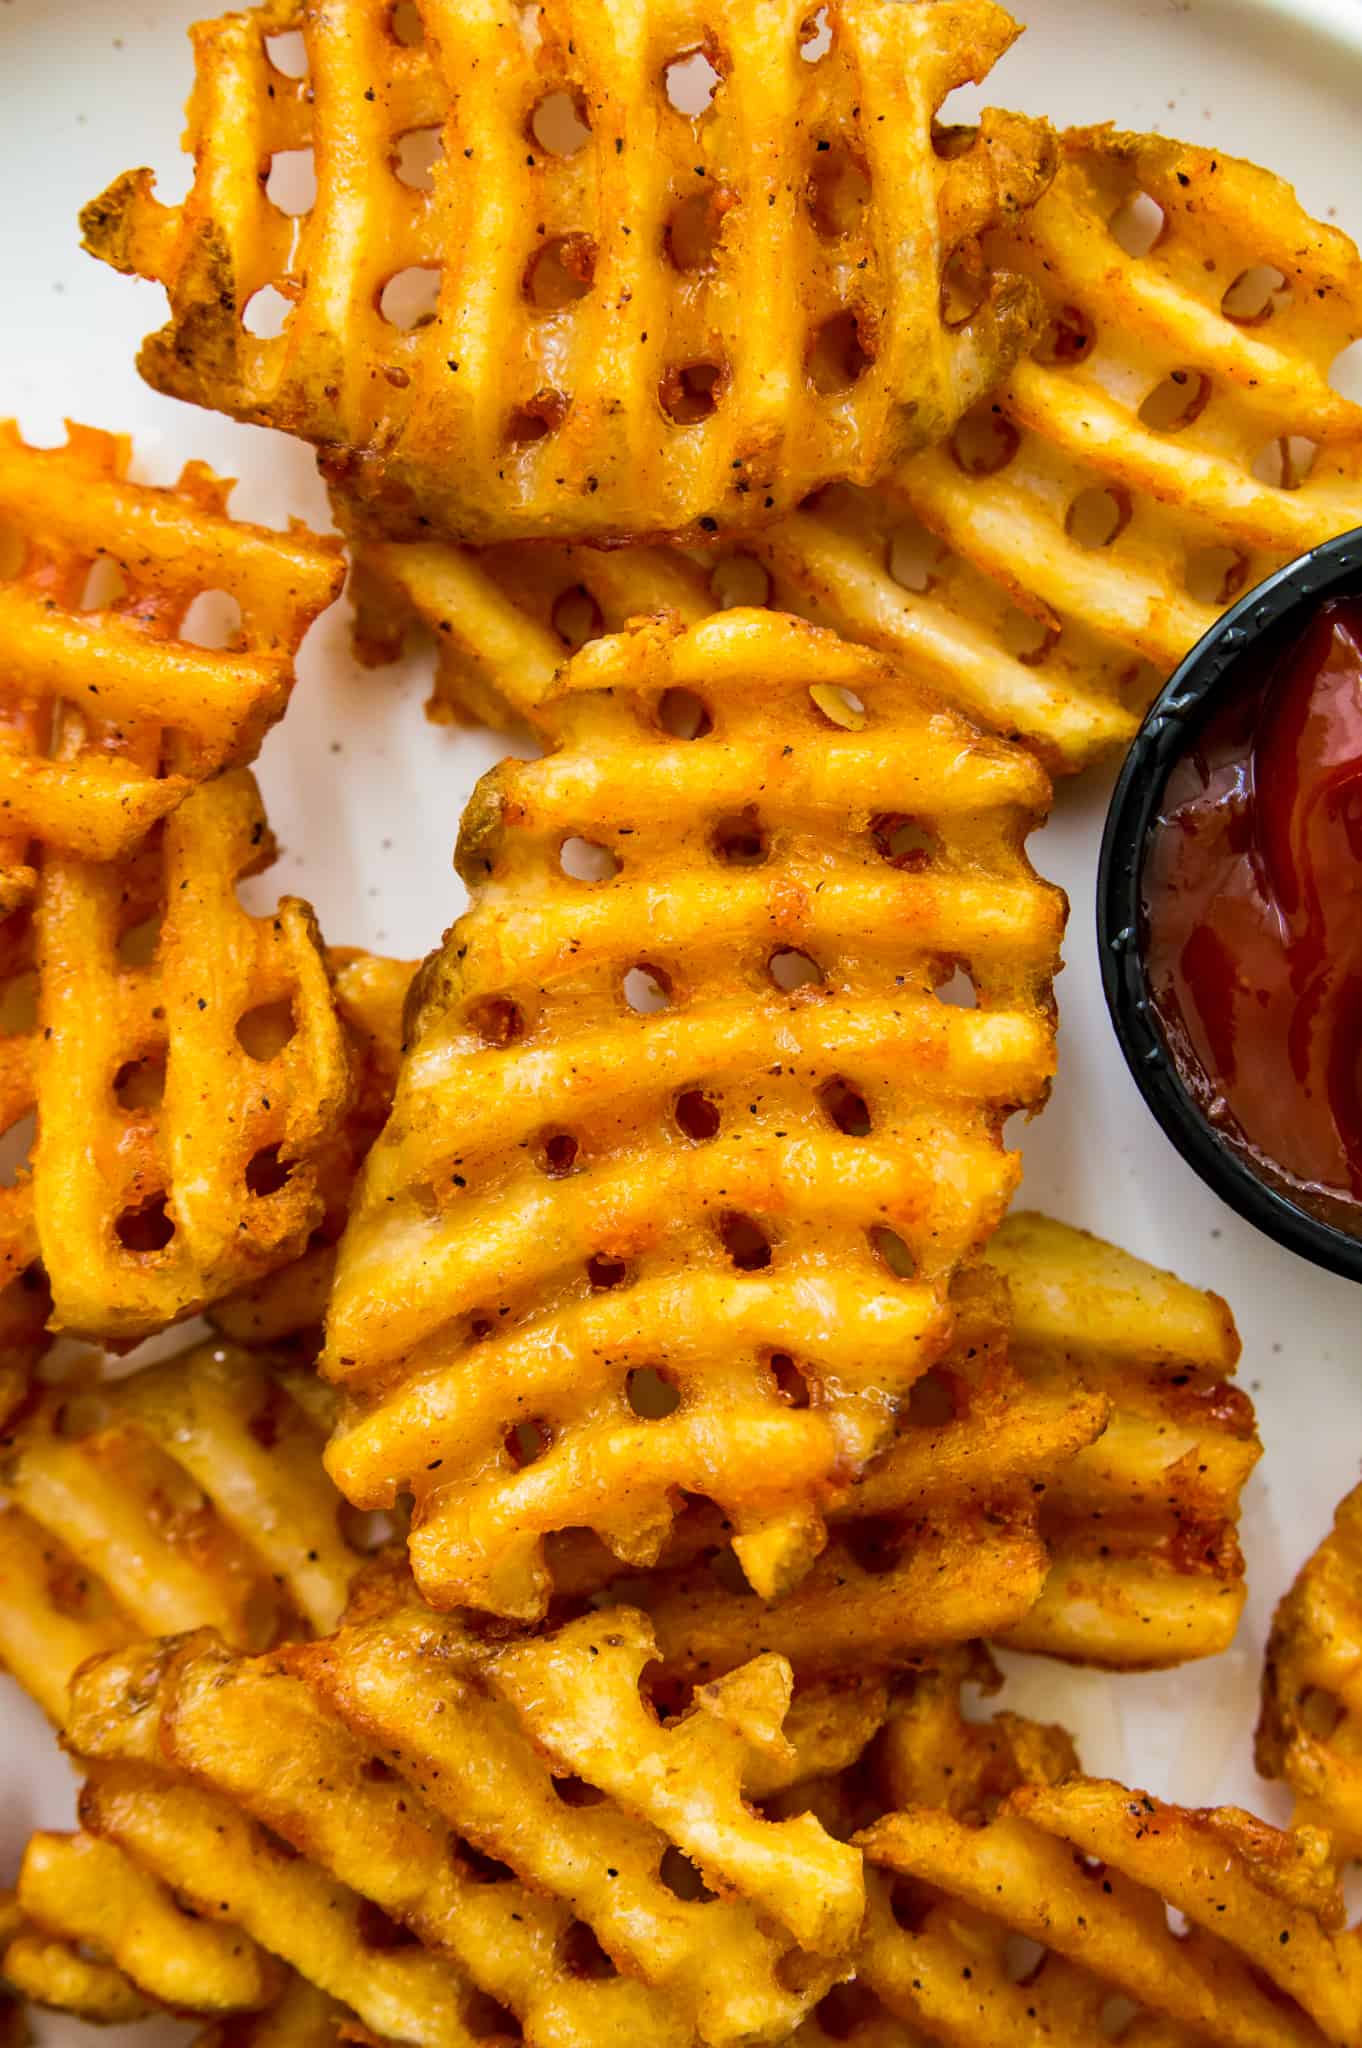 A plate of cooked waffle fries with ketchup beside the fries.